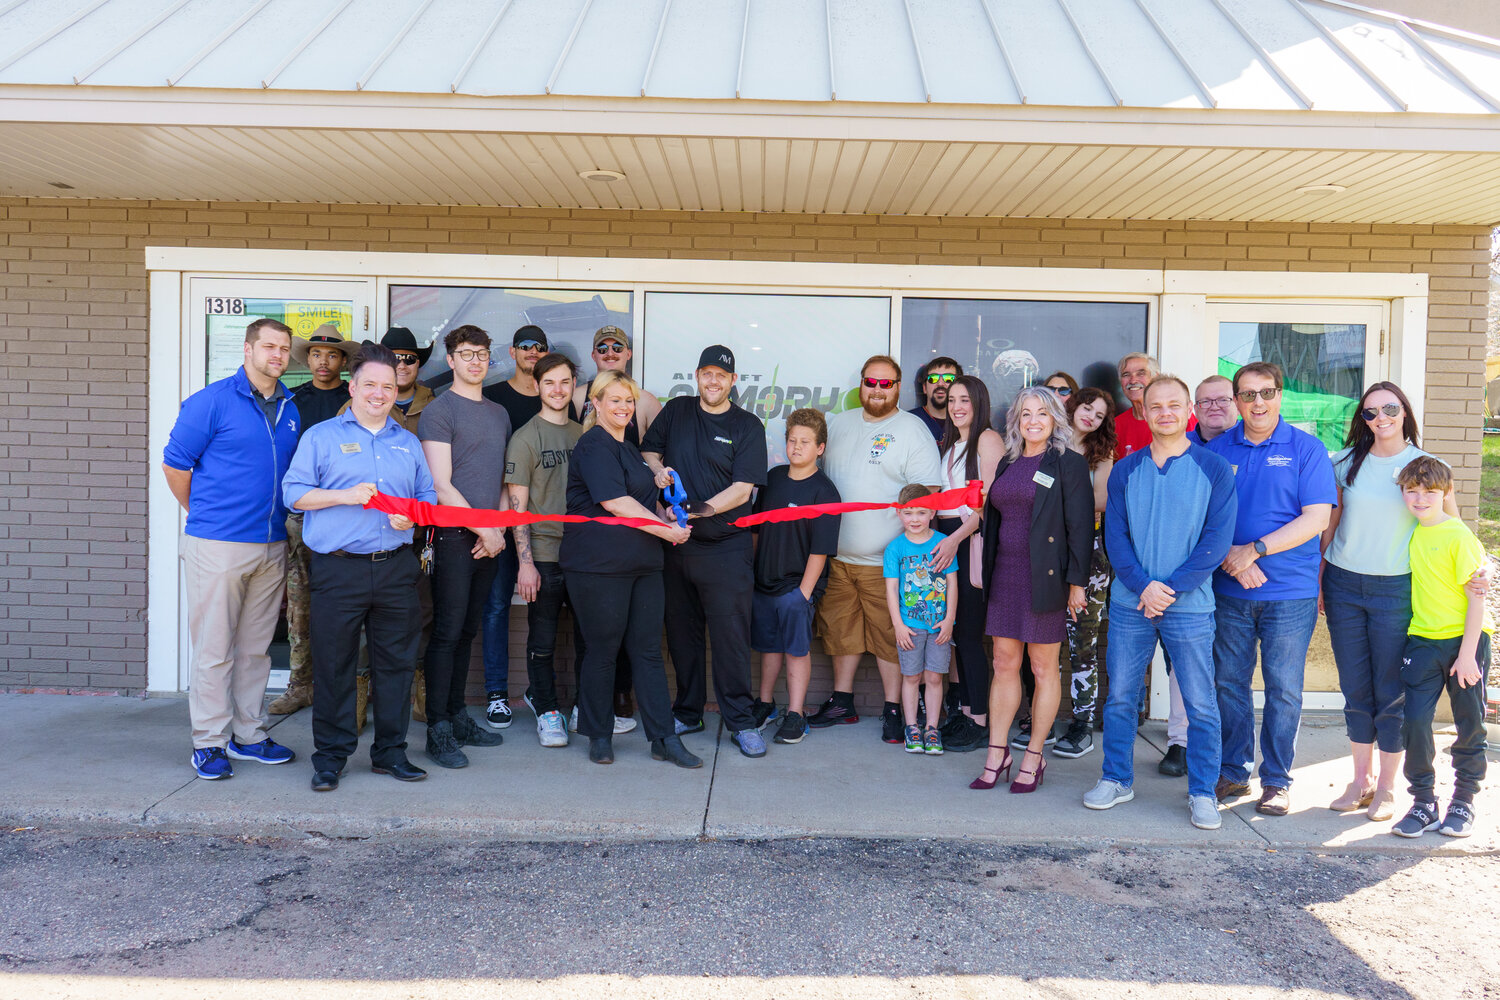 The grand opening celebration and ribbon cutting for Airsoft Armory was a smashing success as shown here from the large turnout in front of their store at 1318 Vermillion Street in Hastings.